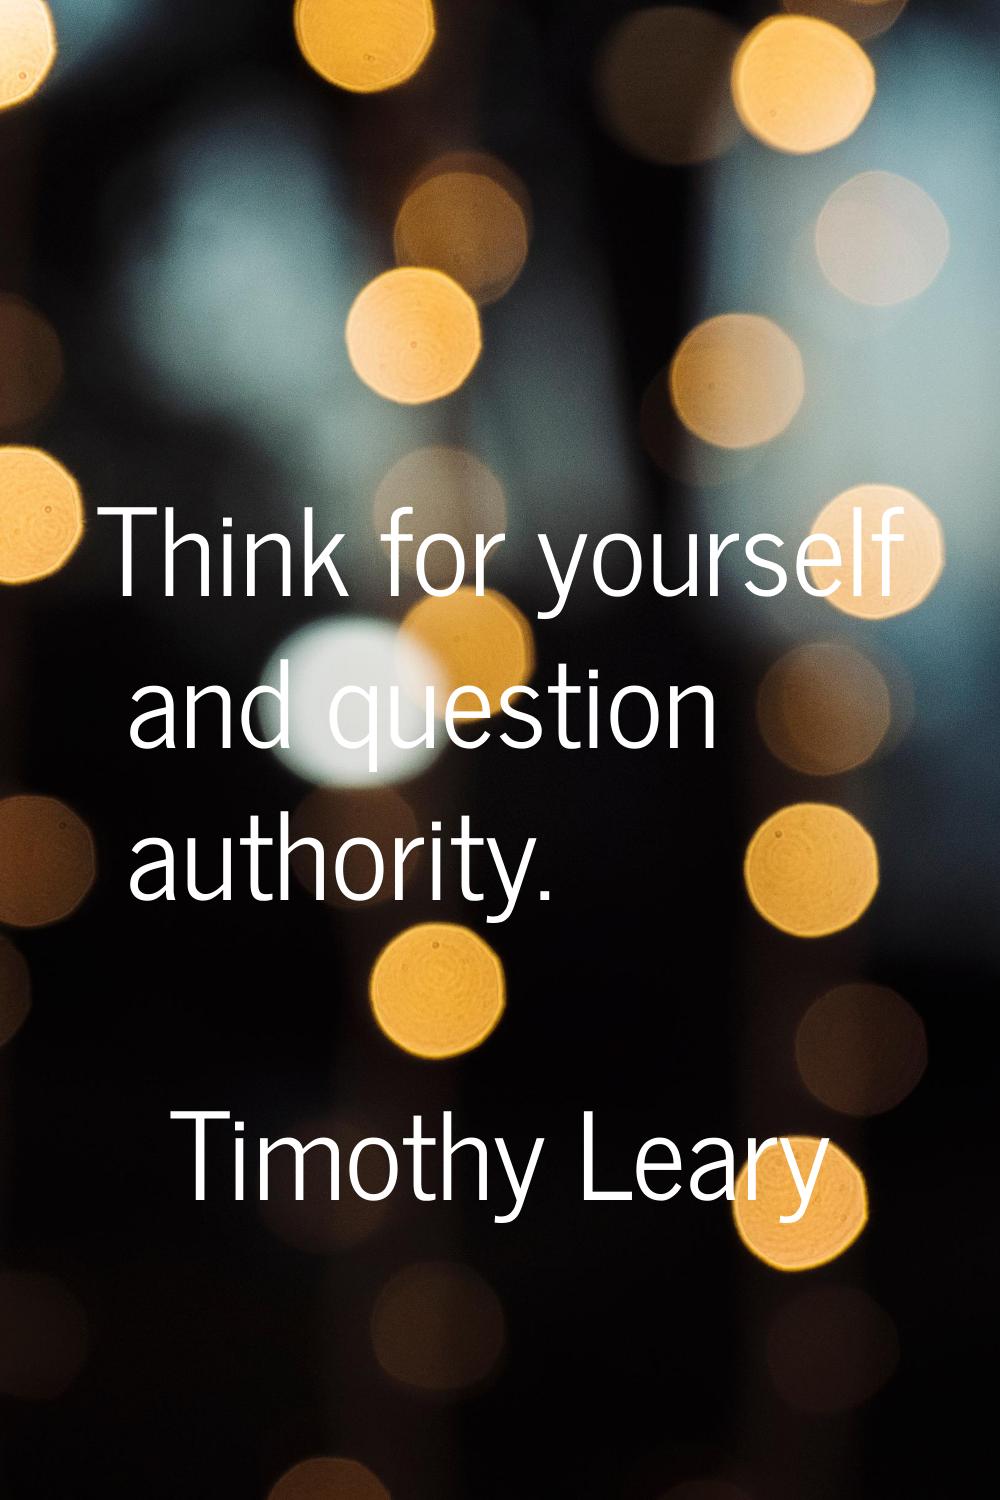 Think for yourself and question authority.